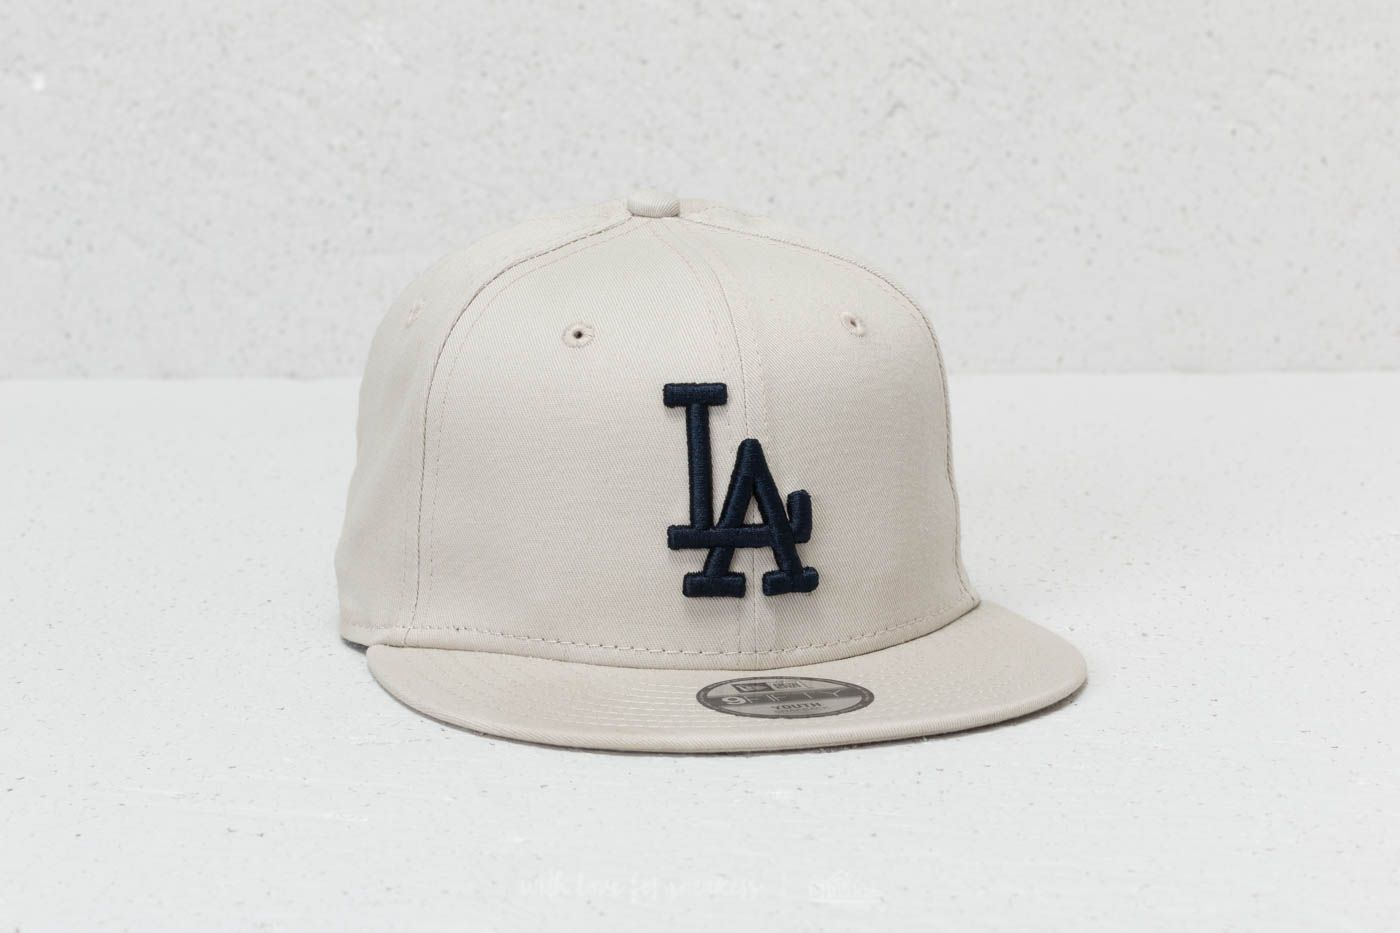 Caps New Era 9Fifty Youth MLB League Essential Los Angeles Dodgers Cap Satin/ Navy